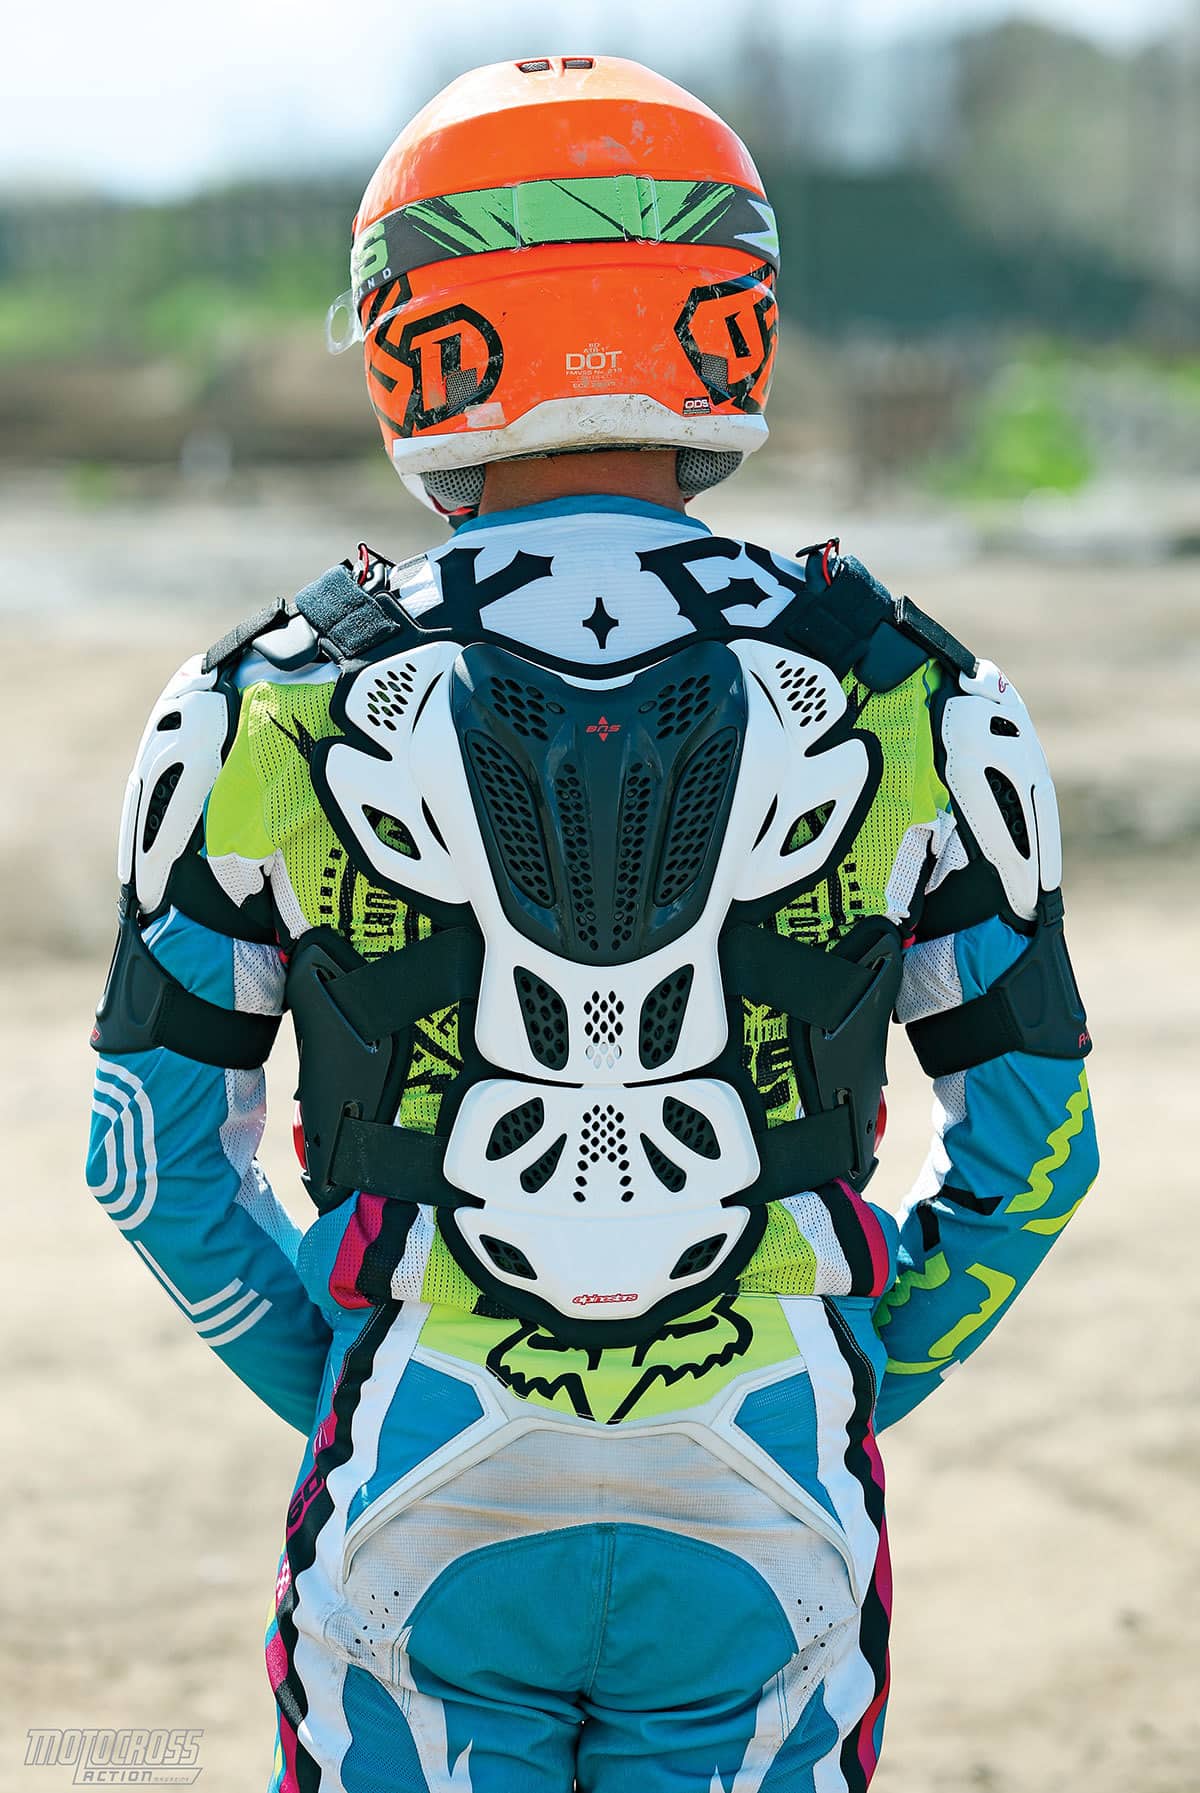 A-10 V2 Full Chest Protector by Alpinestars - Slavens Racing